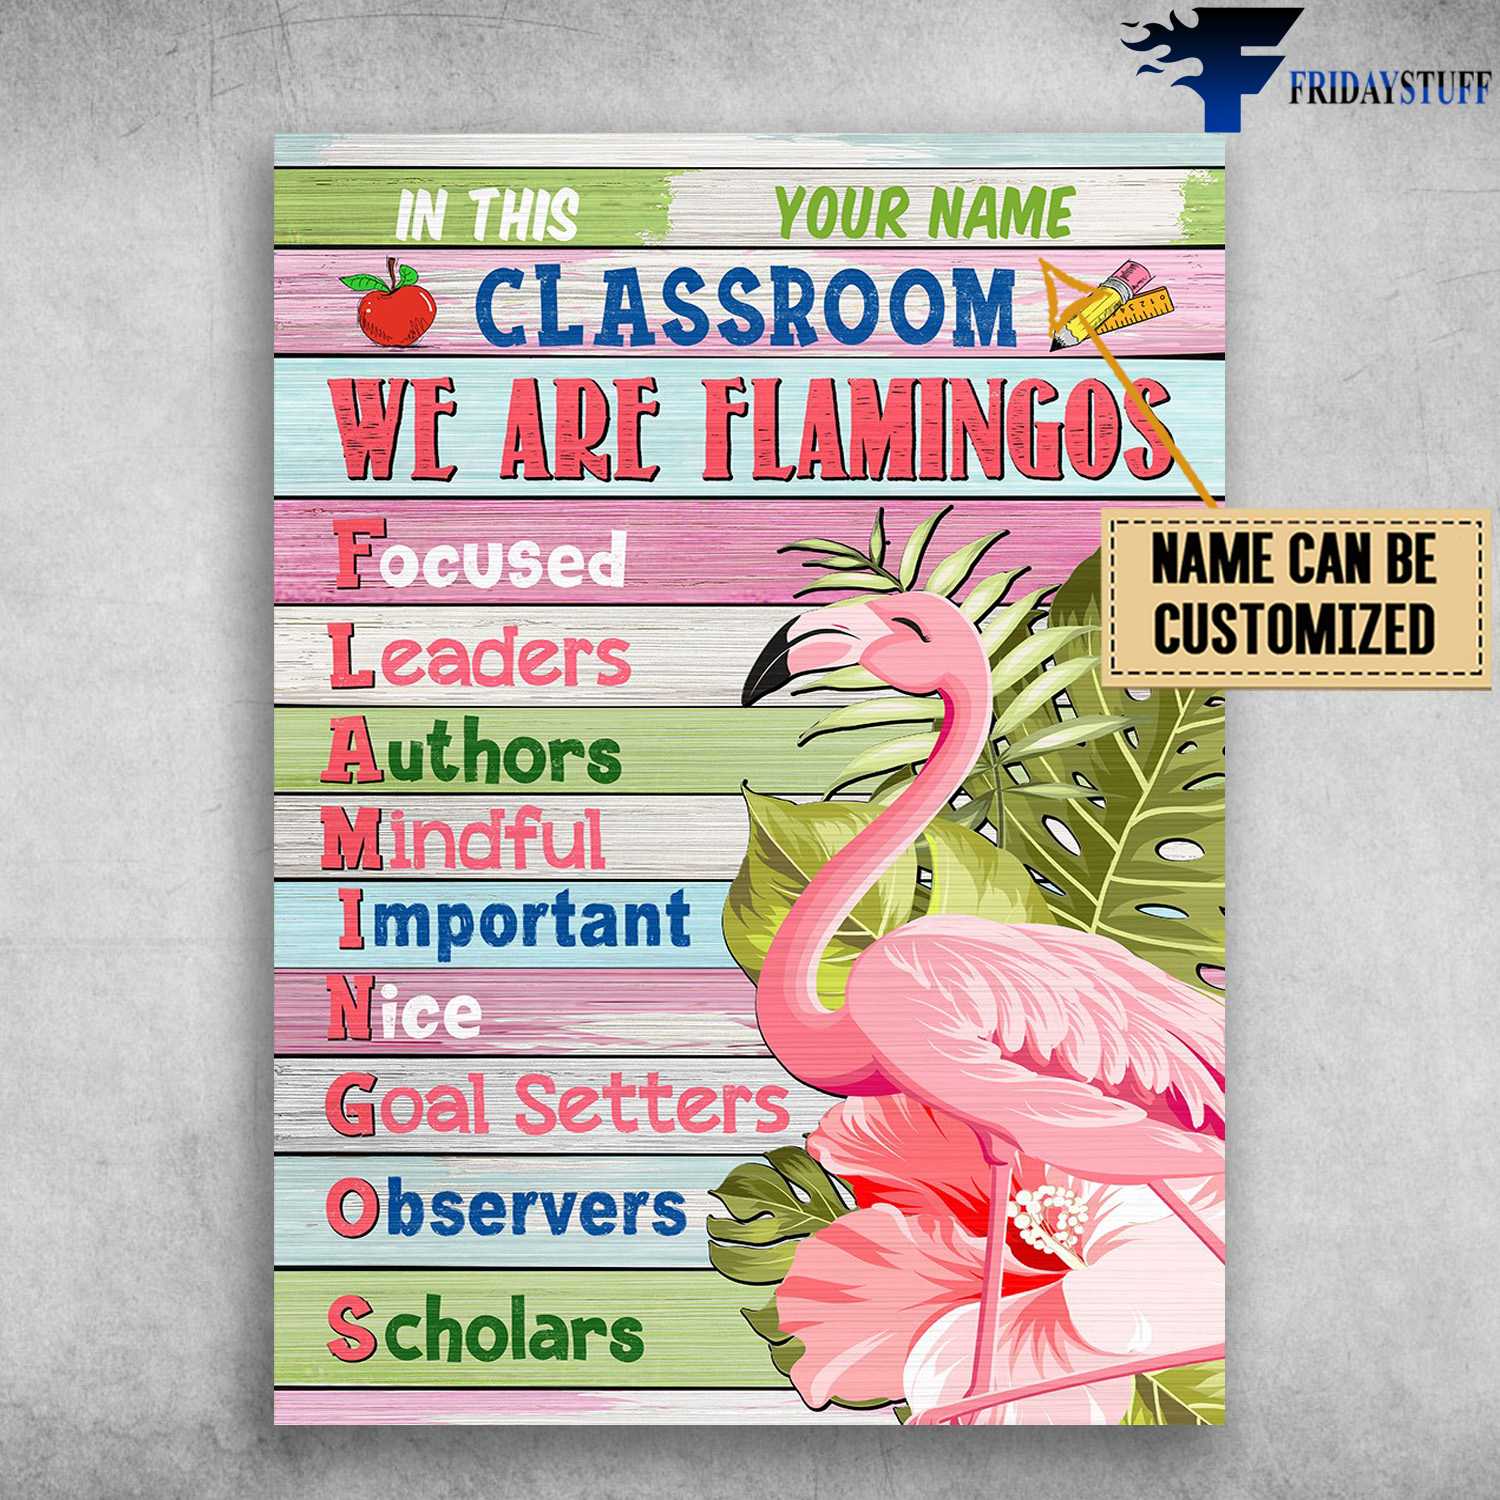 Flamingo Poster, In This Classroom , We Are Flamingos, Focused, Leaders, Authors, Mindful, Important, Nice, Goal Setters